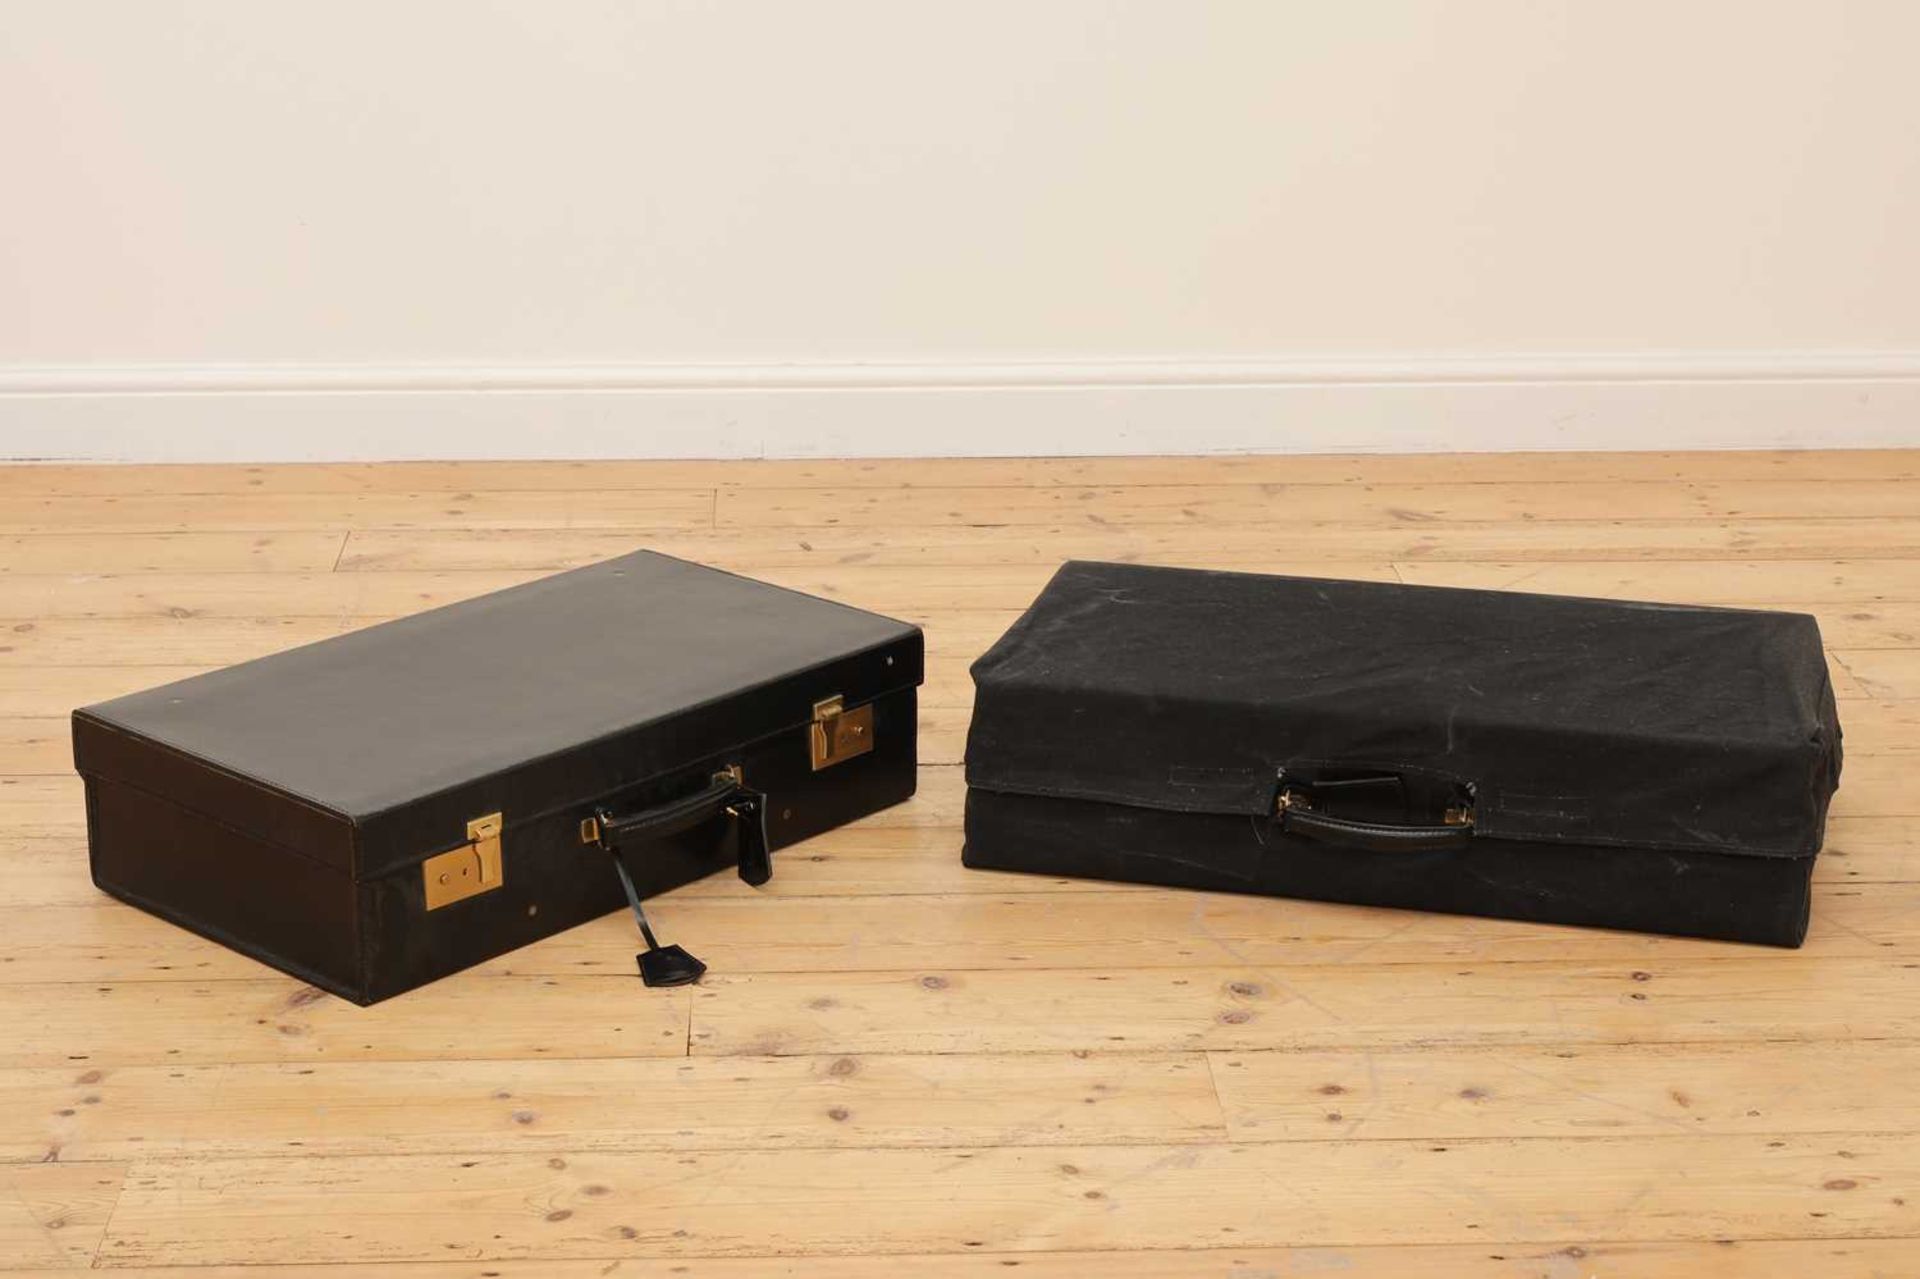 Two graduated black leather suitcases by Tanner Krolle, - Image 2 of 4